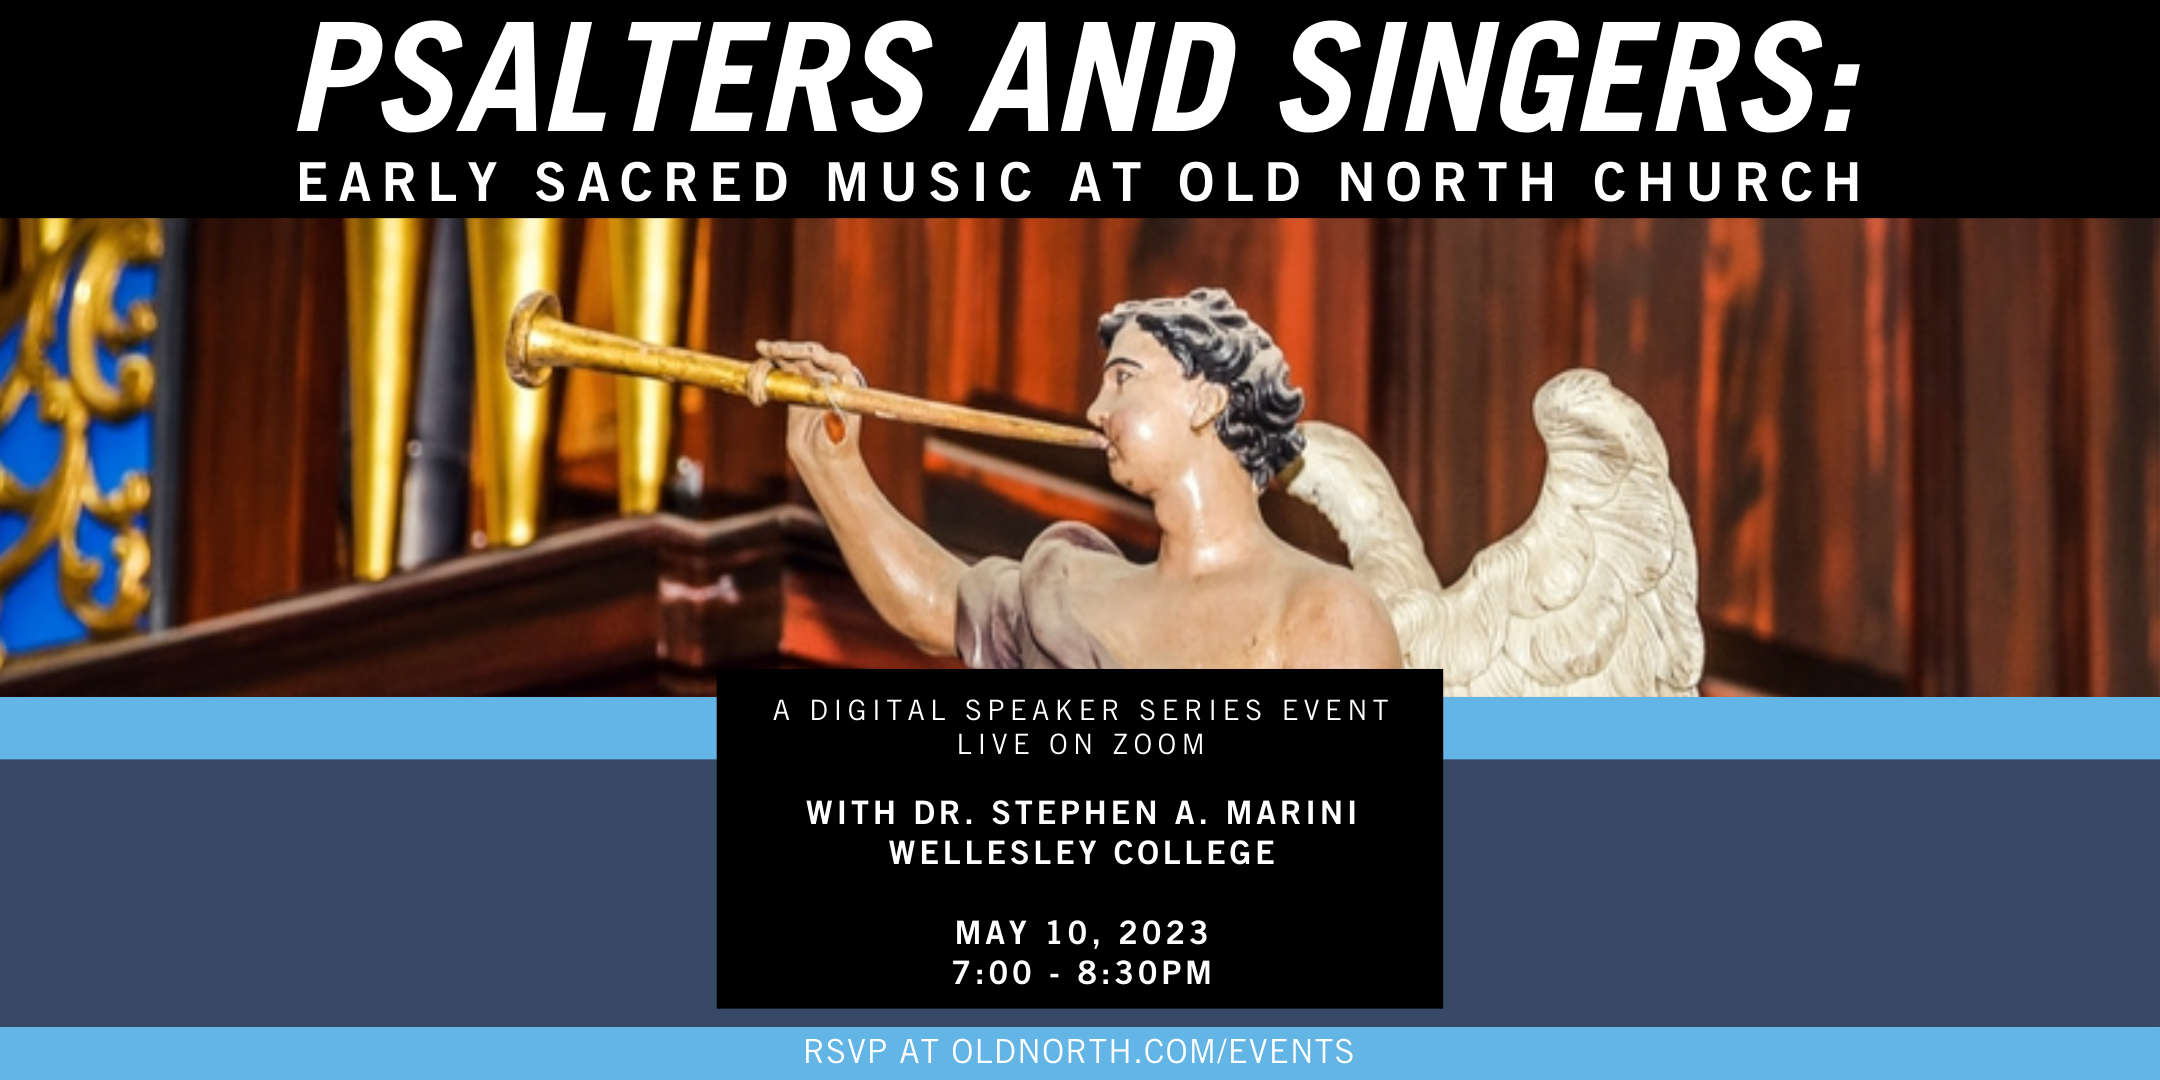 Psalters and Singers Early Sacred Music at Old North Church